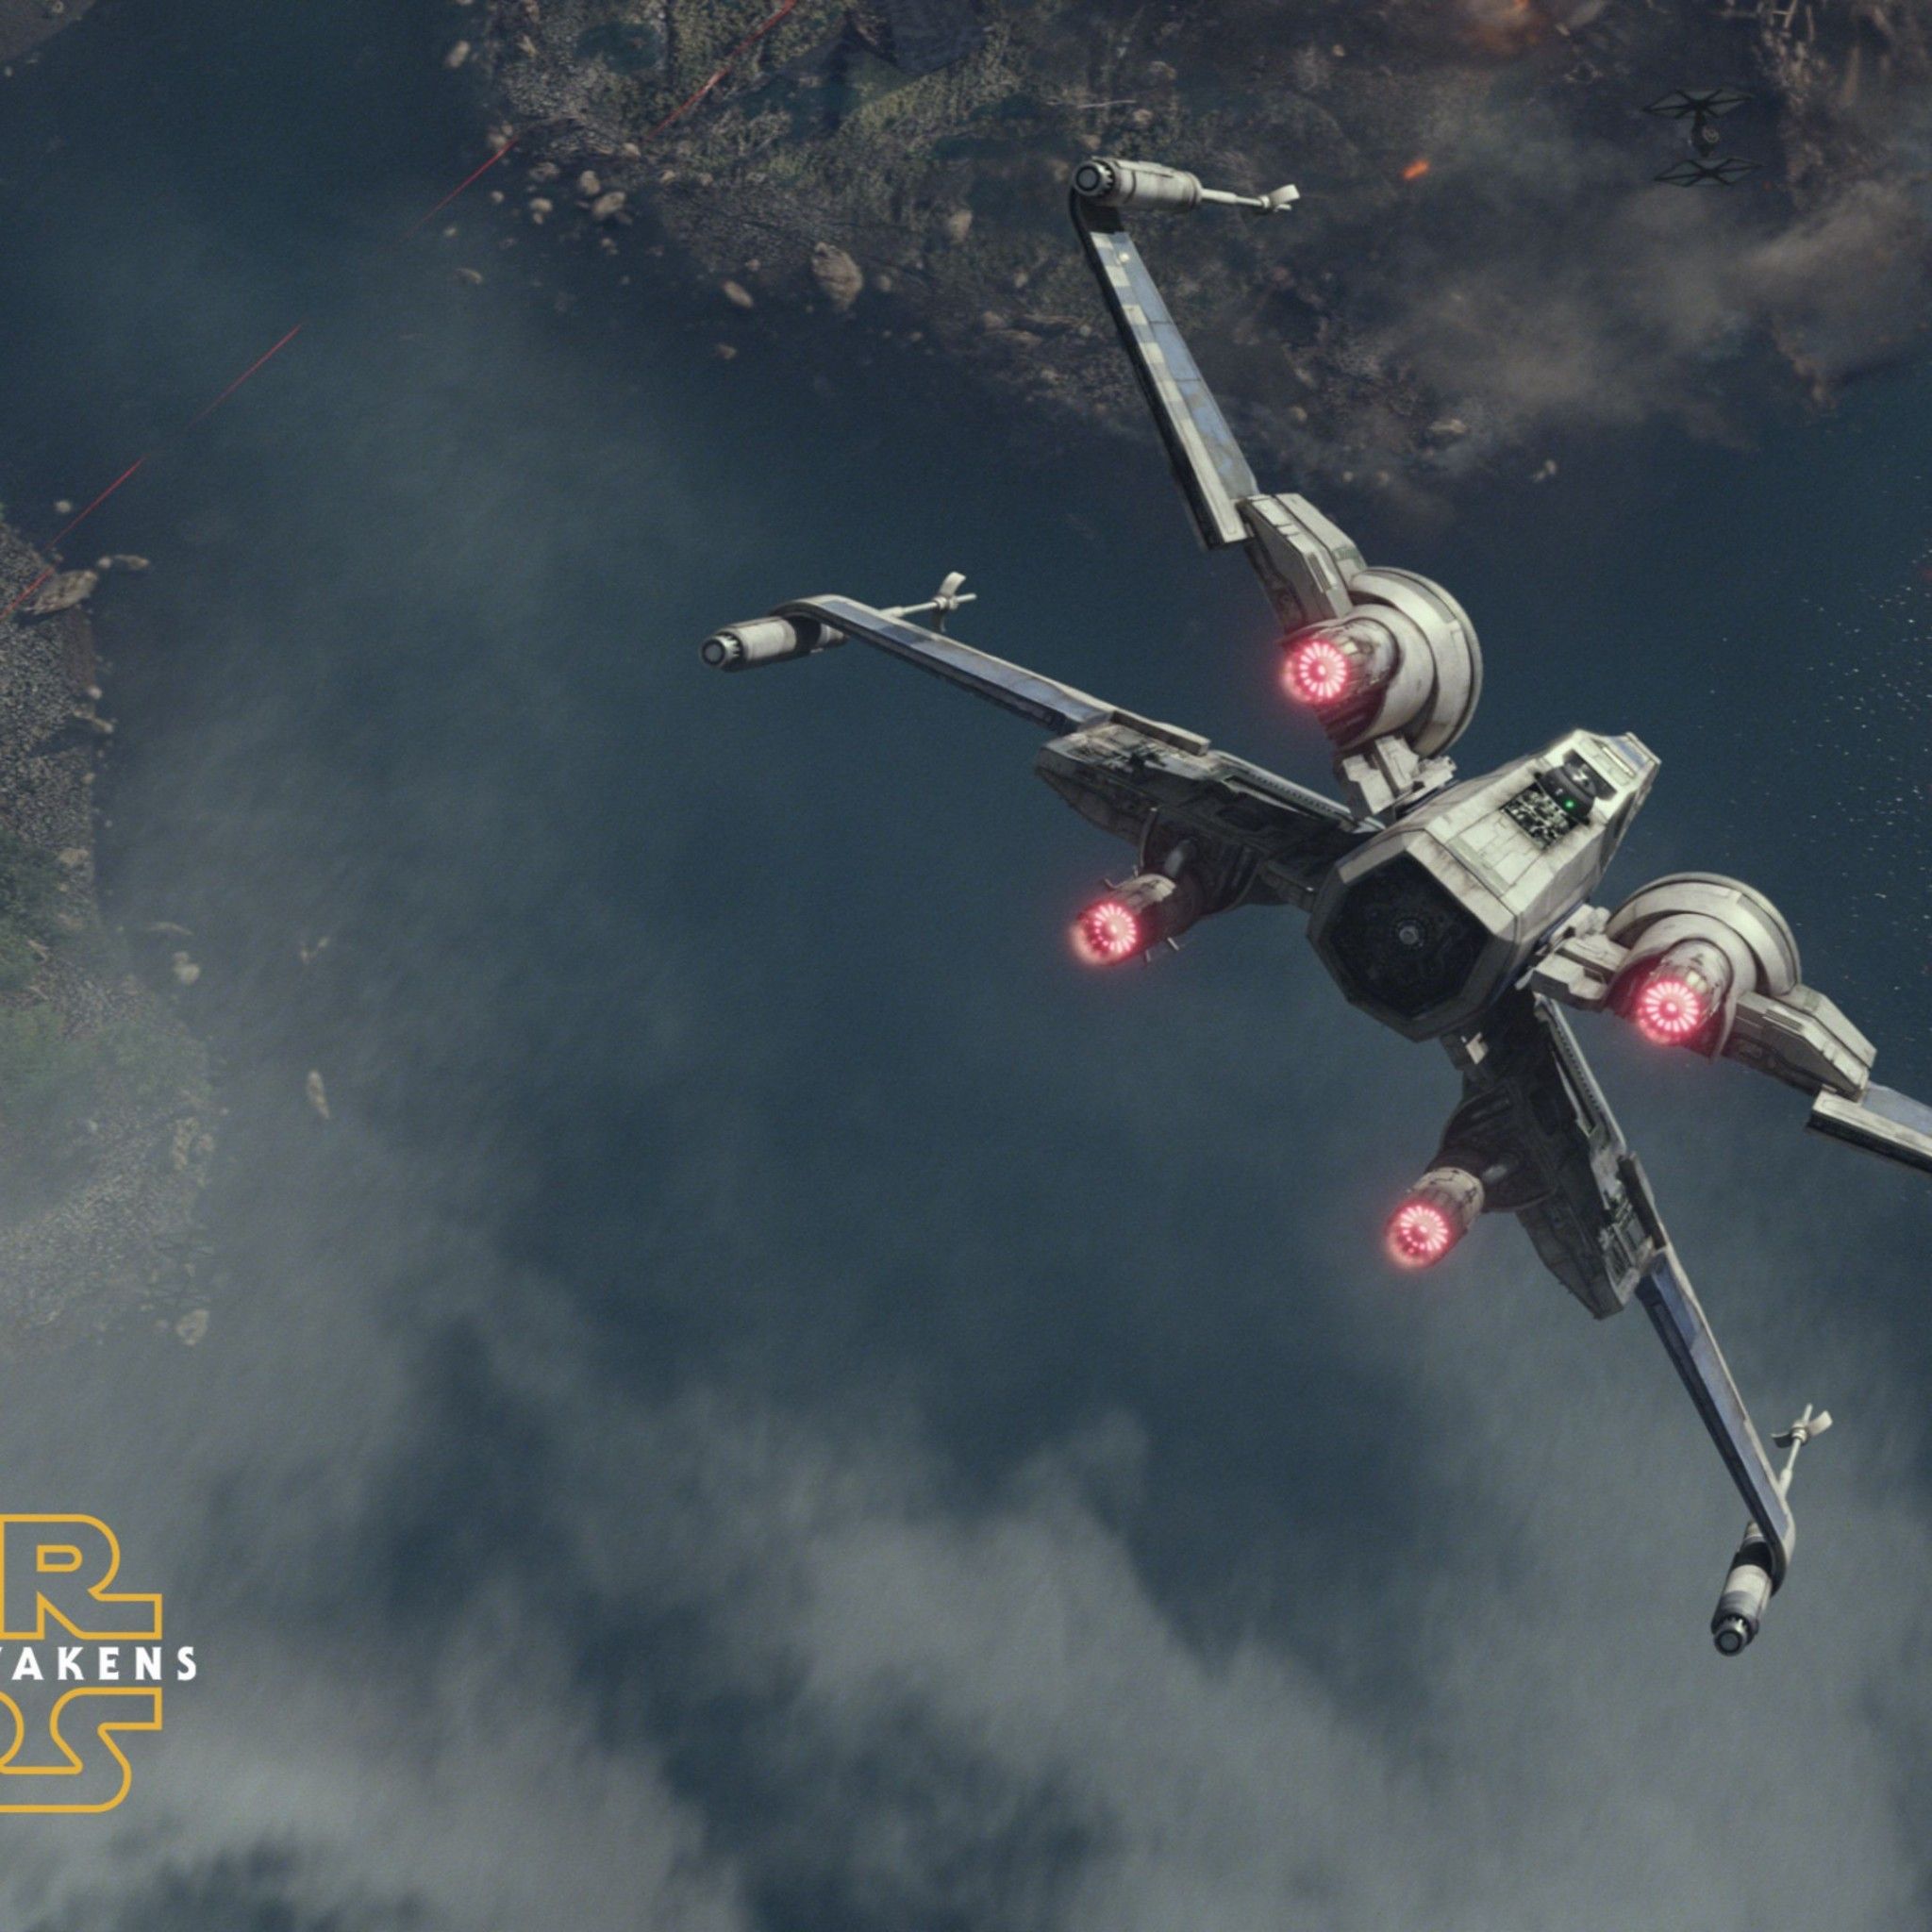 X Wing Fighter Star Wars The Force Awakens 4K Wallpaper. Free 4K. Star Wars, Force Awakens, X Wing